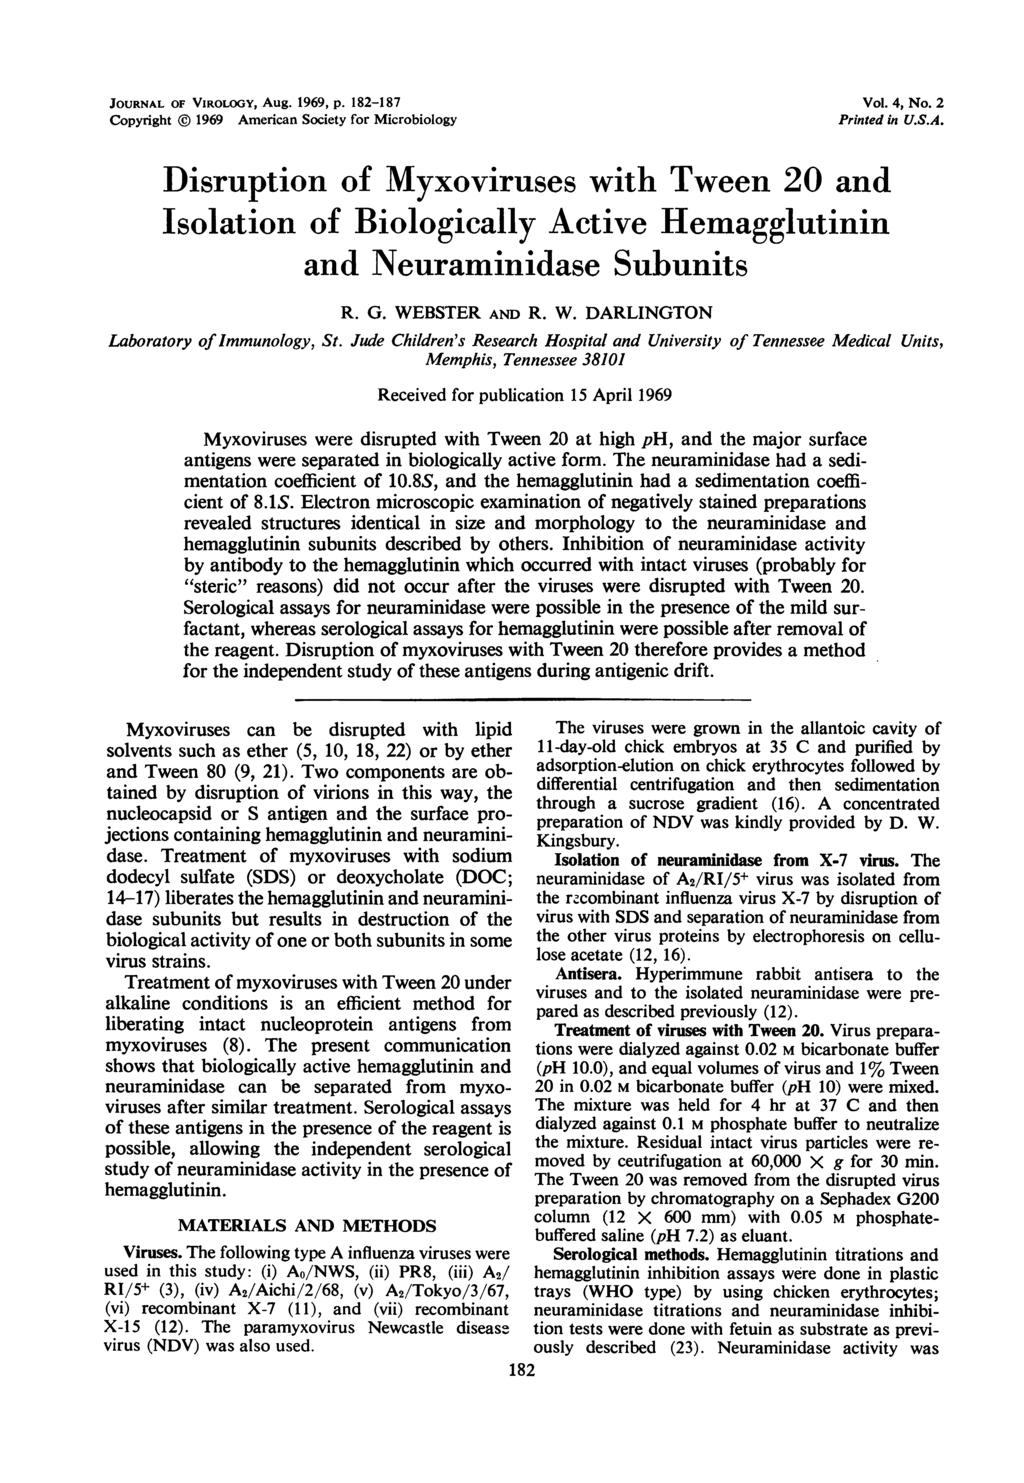 JOURNAL OF VIROLOGY, Aug. 1969, p. 18-187 Copyright @ 1969 American Society for Microbiology Vol. 4, No. Printed in U.S.A. Disruption of Myxoviruses with Tween 0 and Isolation of Biologically Active Hemagglutinin and Neuraminidase Subunits R.